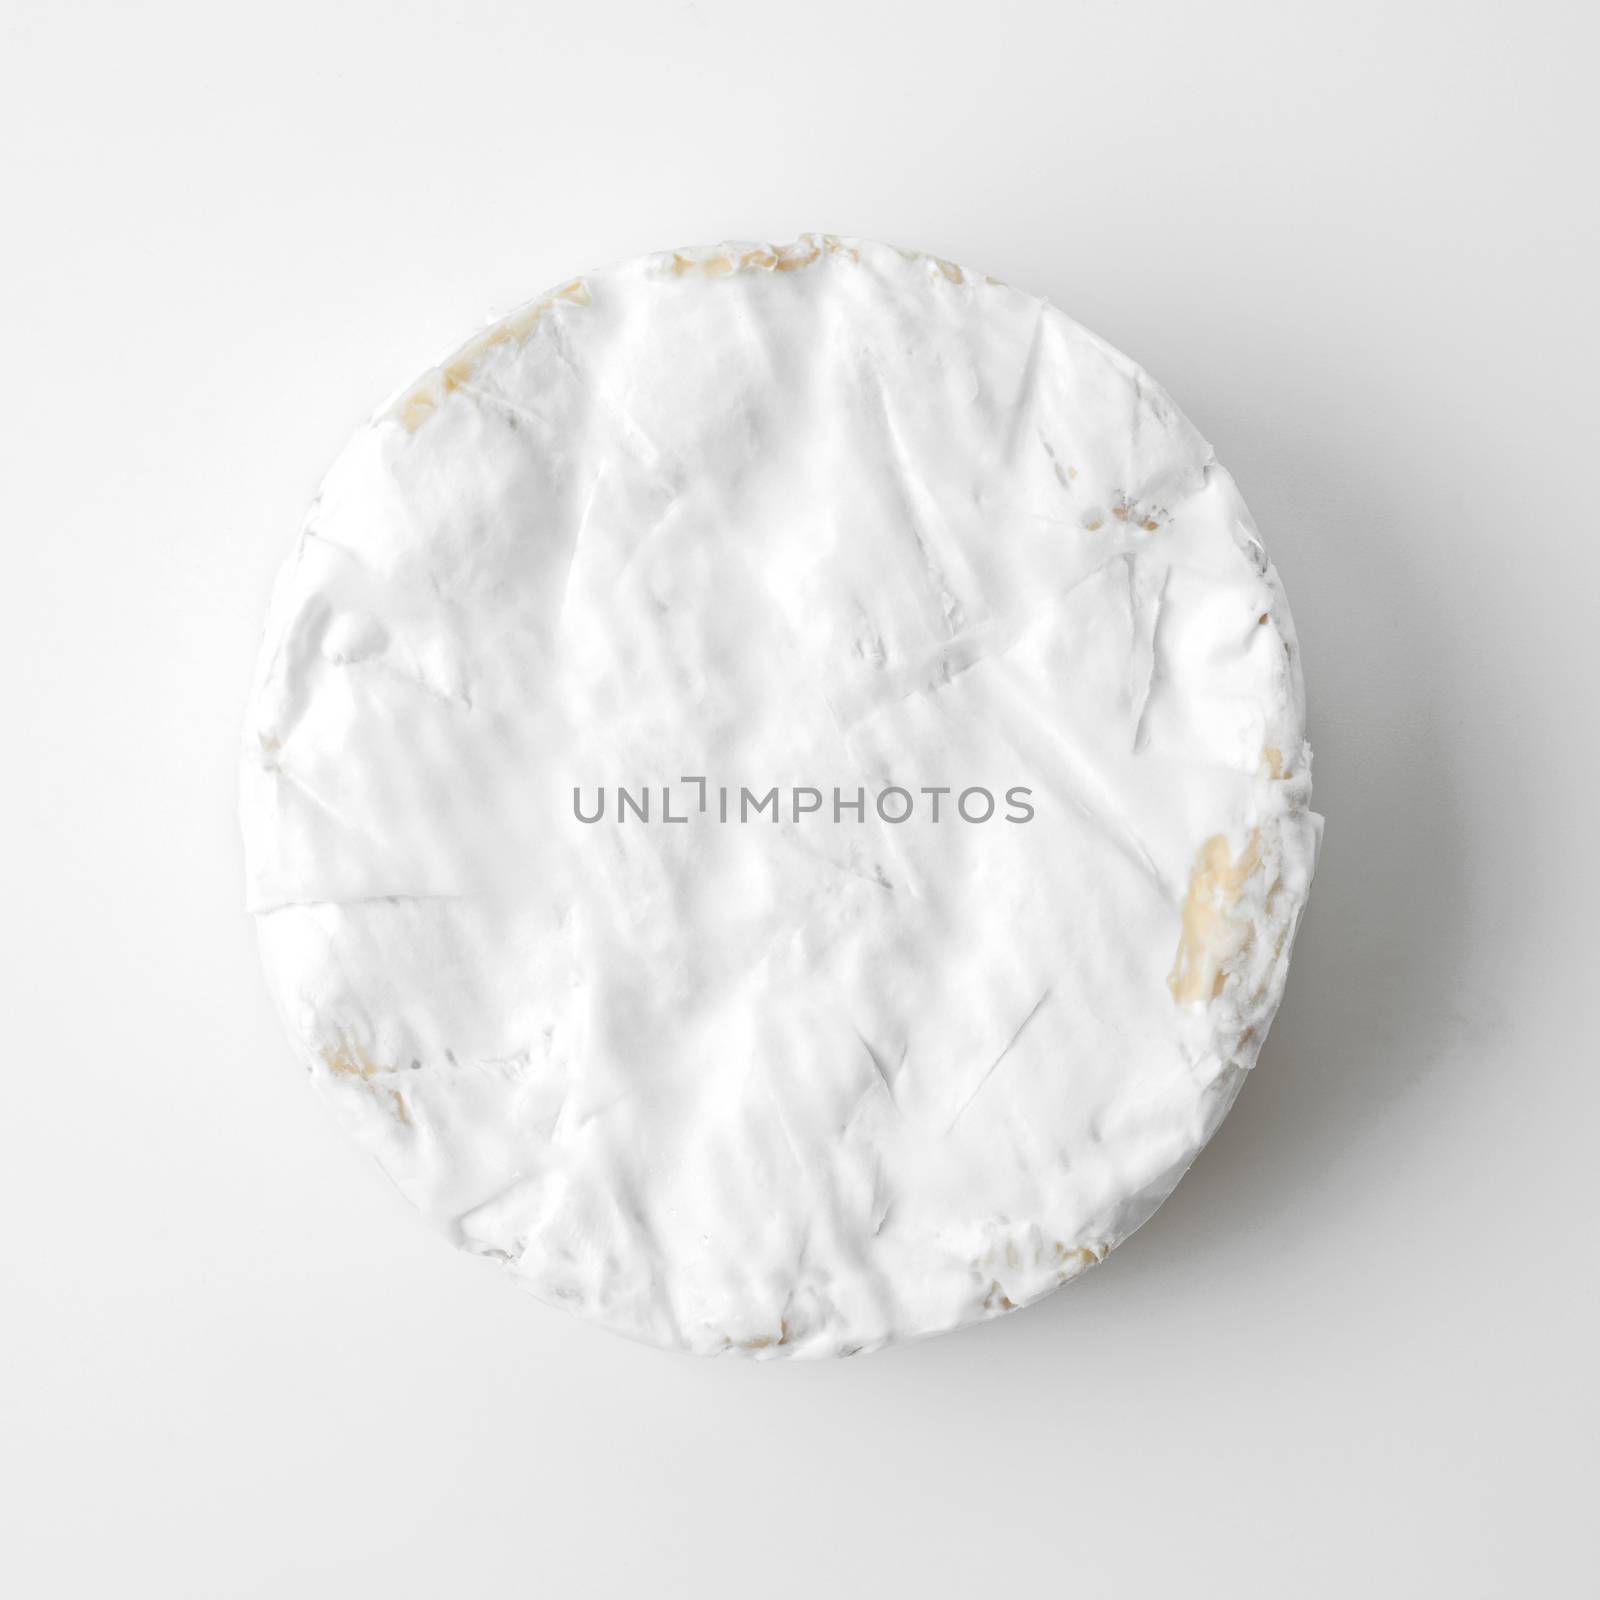 camembert cheese by antpkr